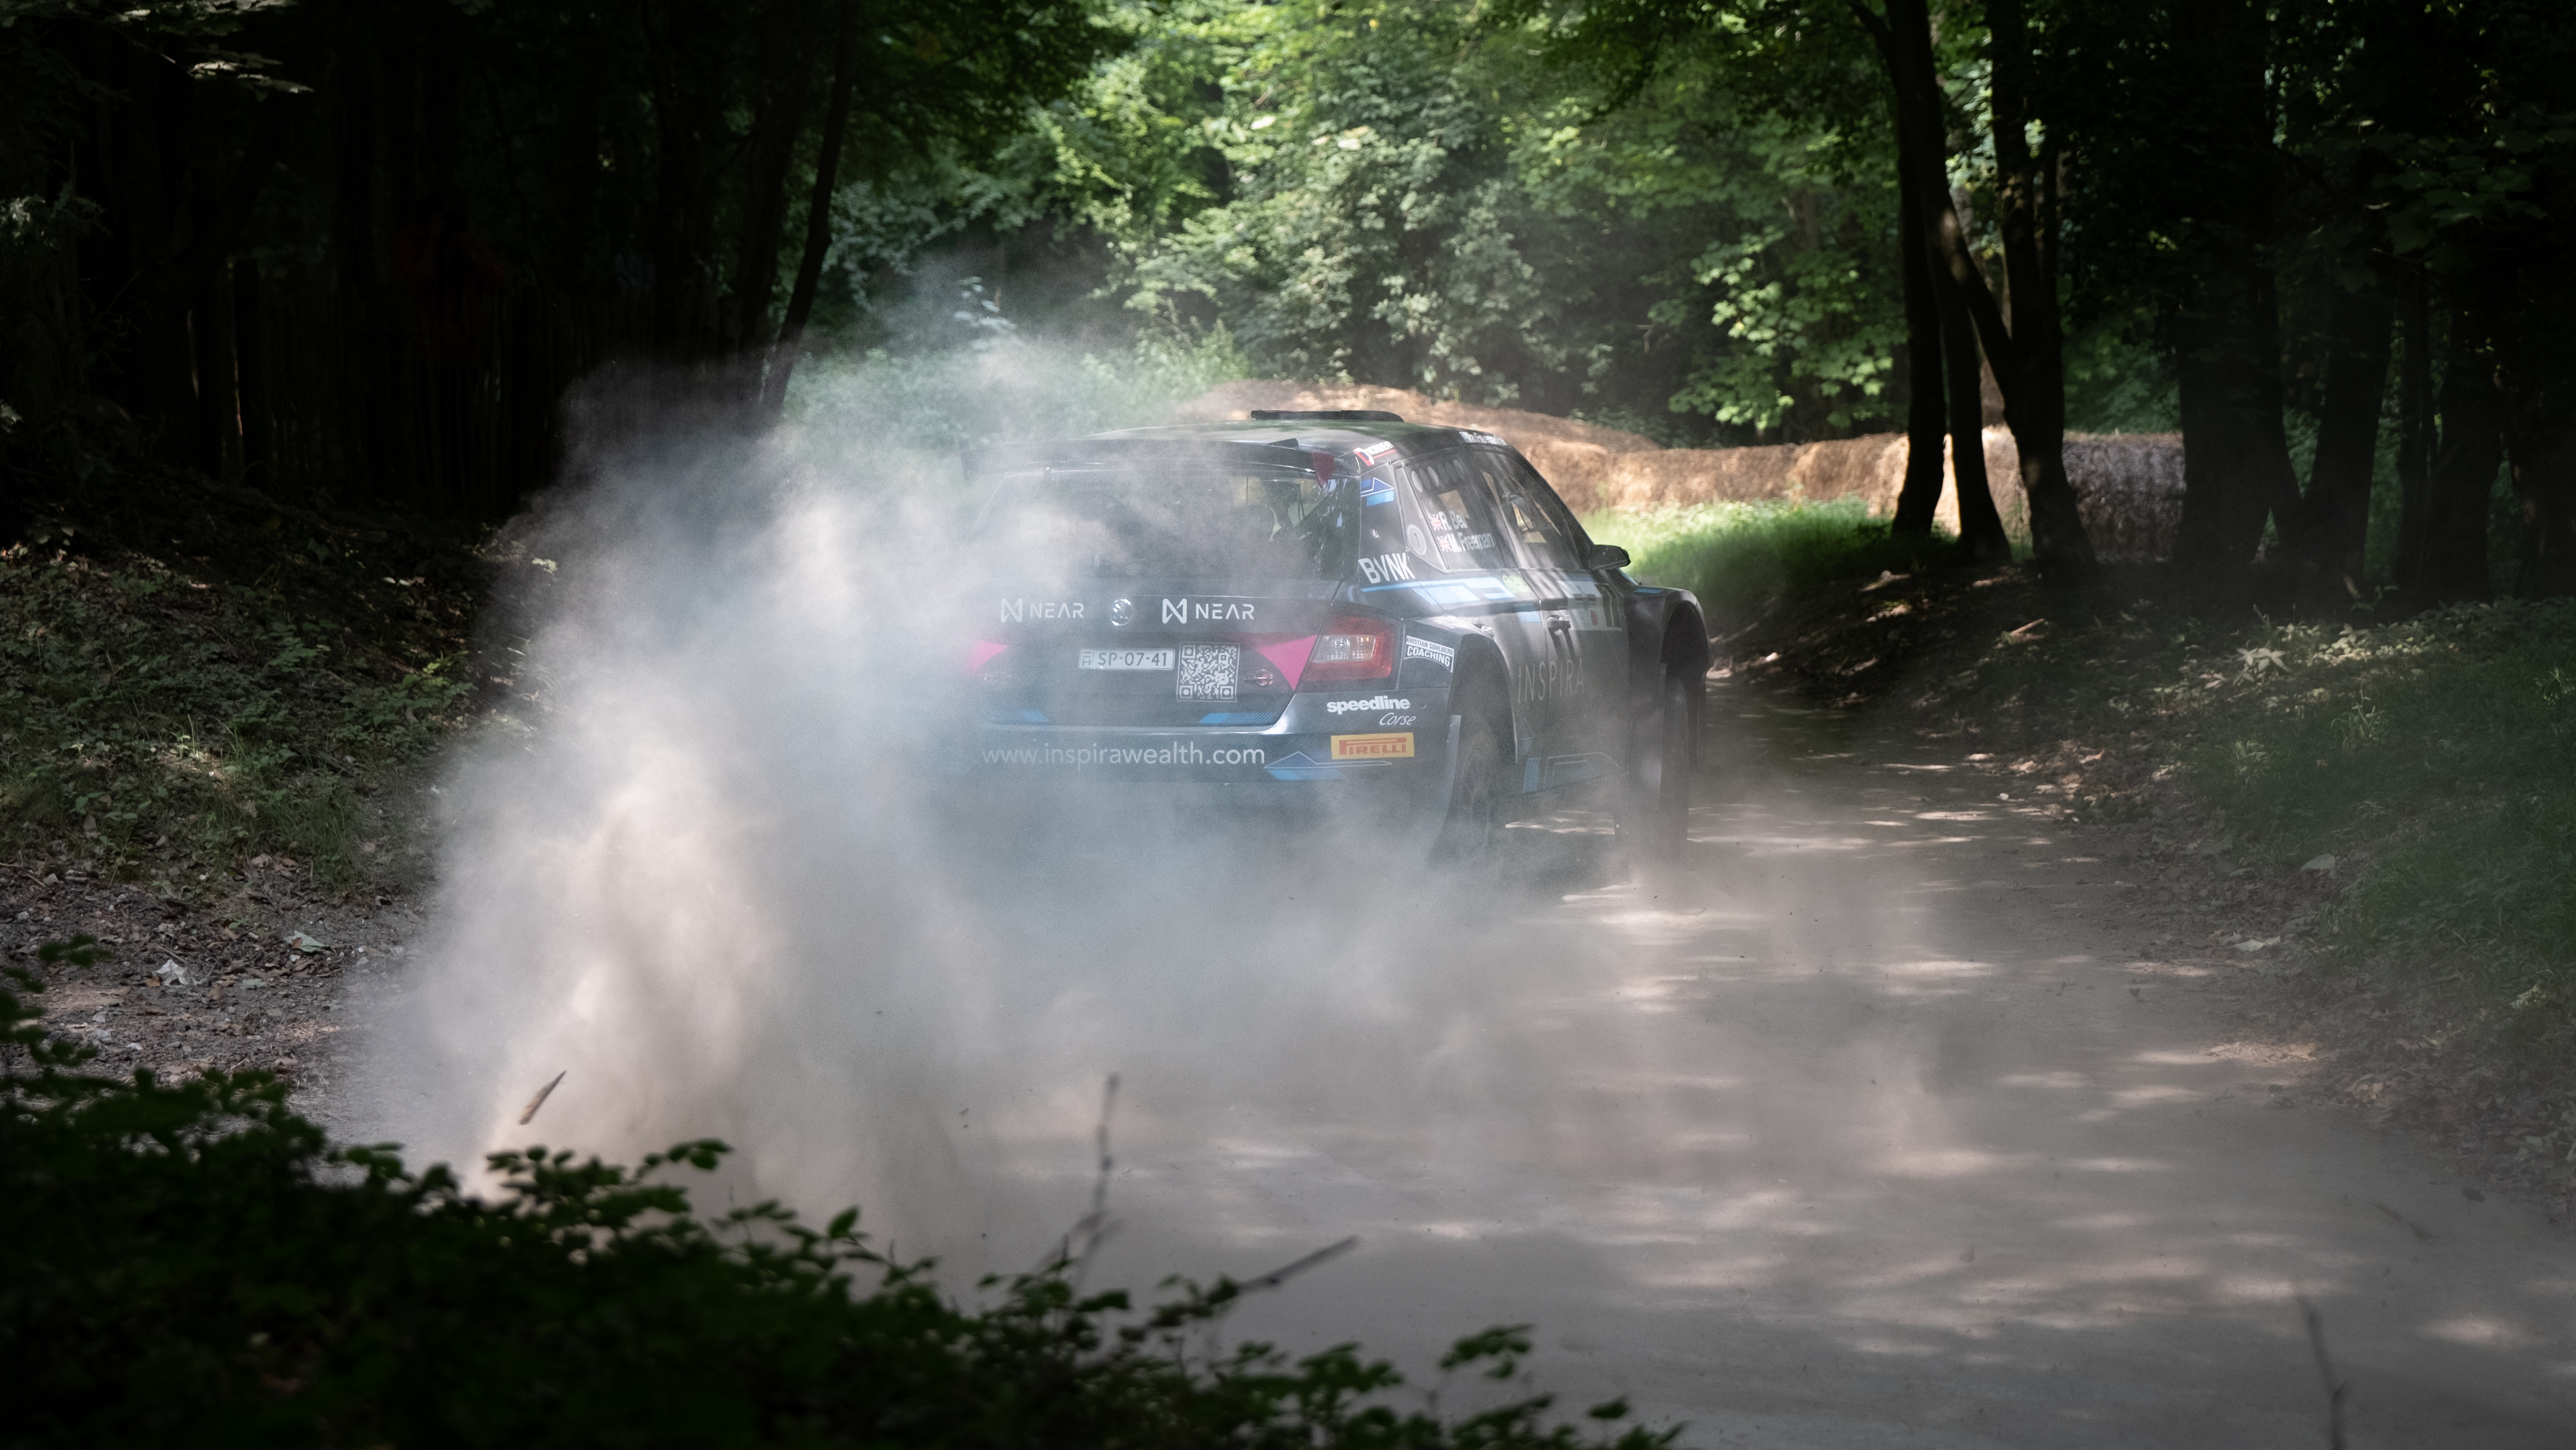 A rally car turning the corner of a race track at Goodwood